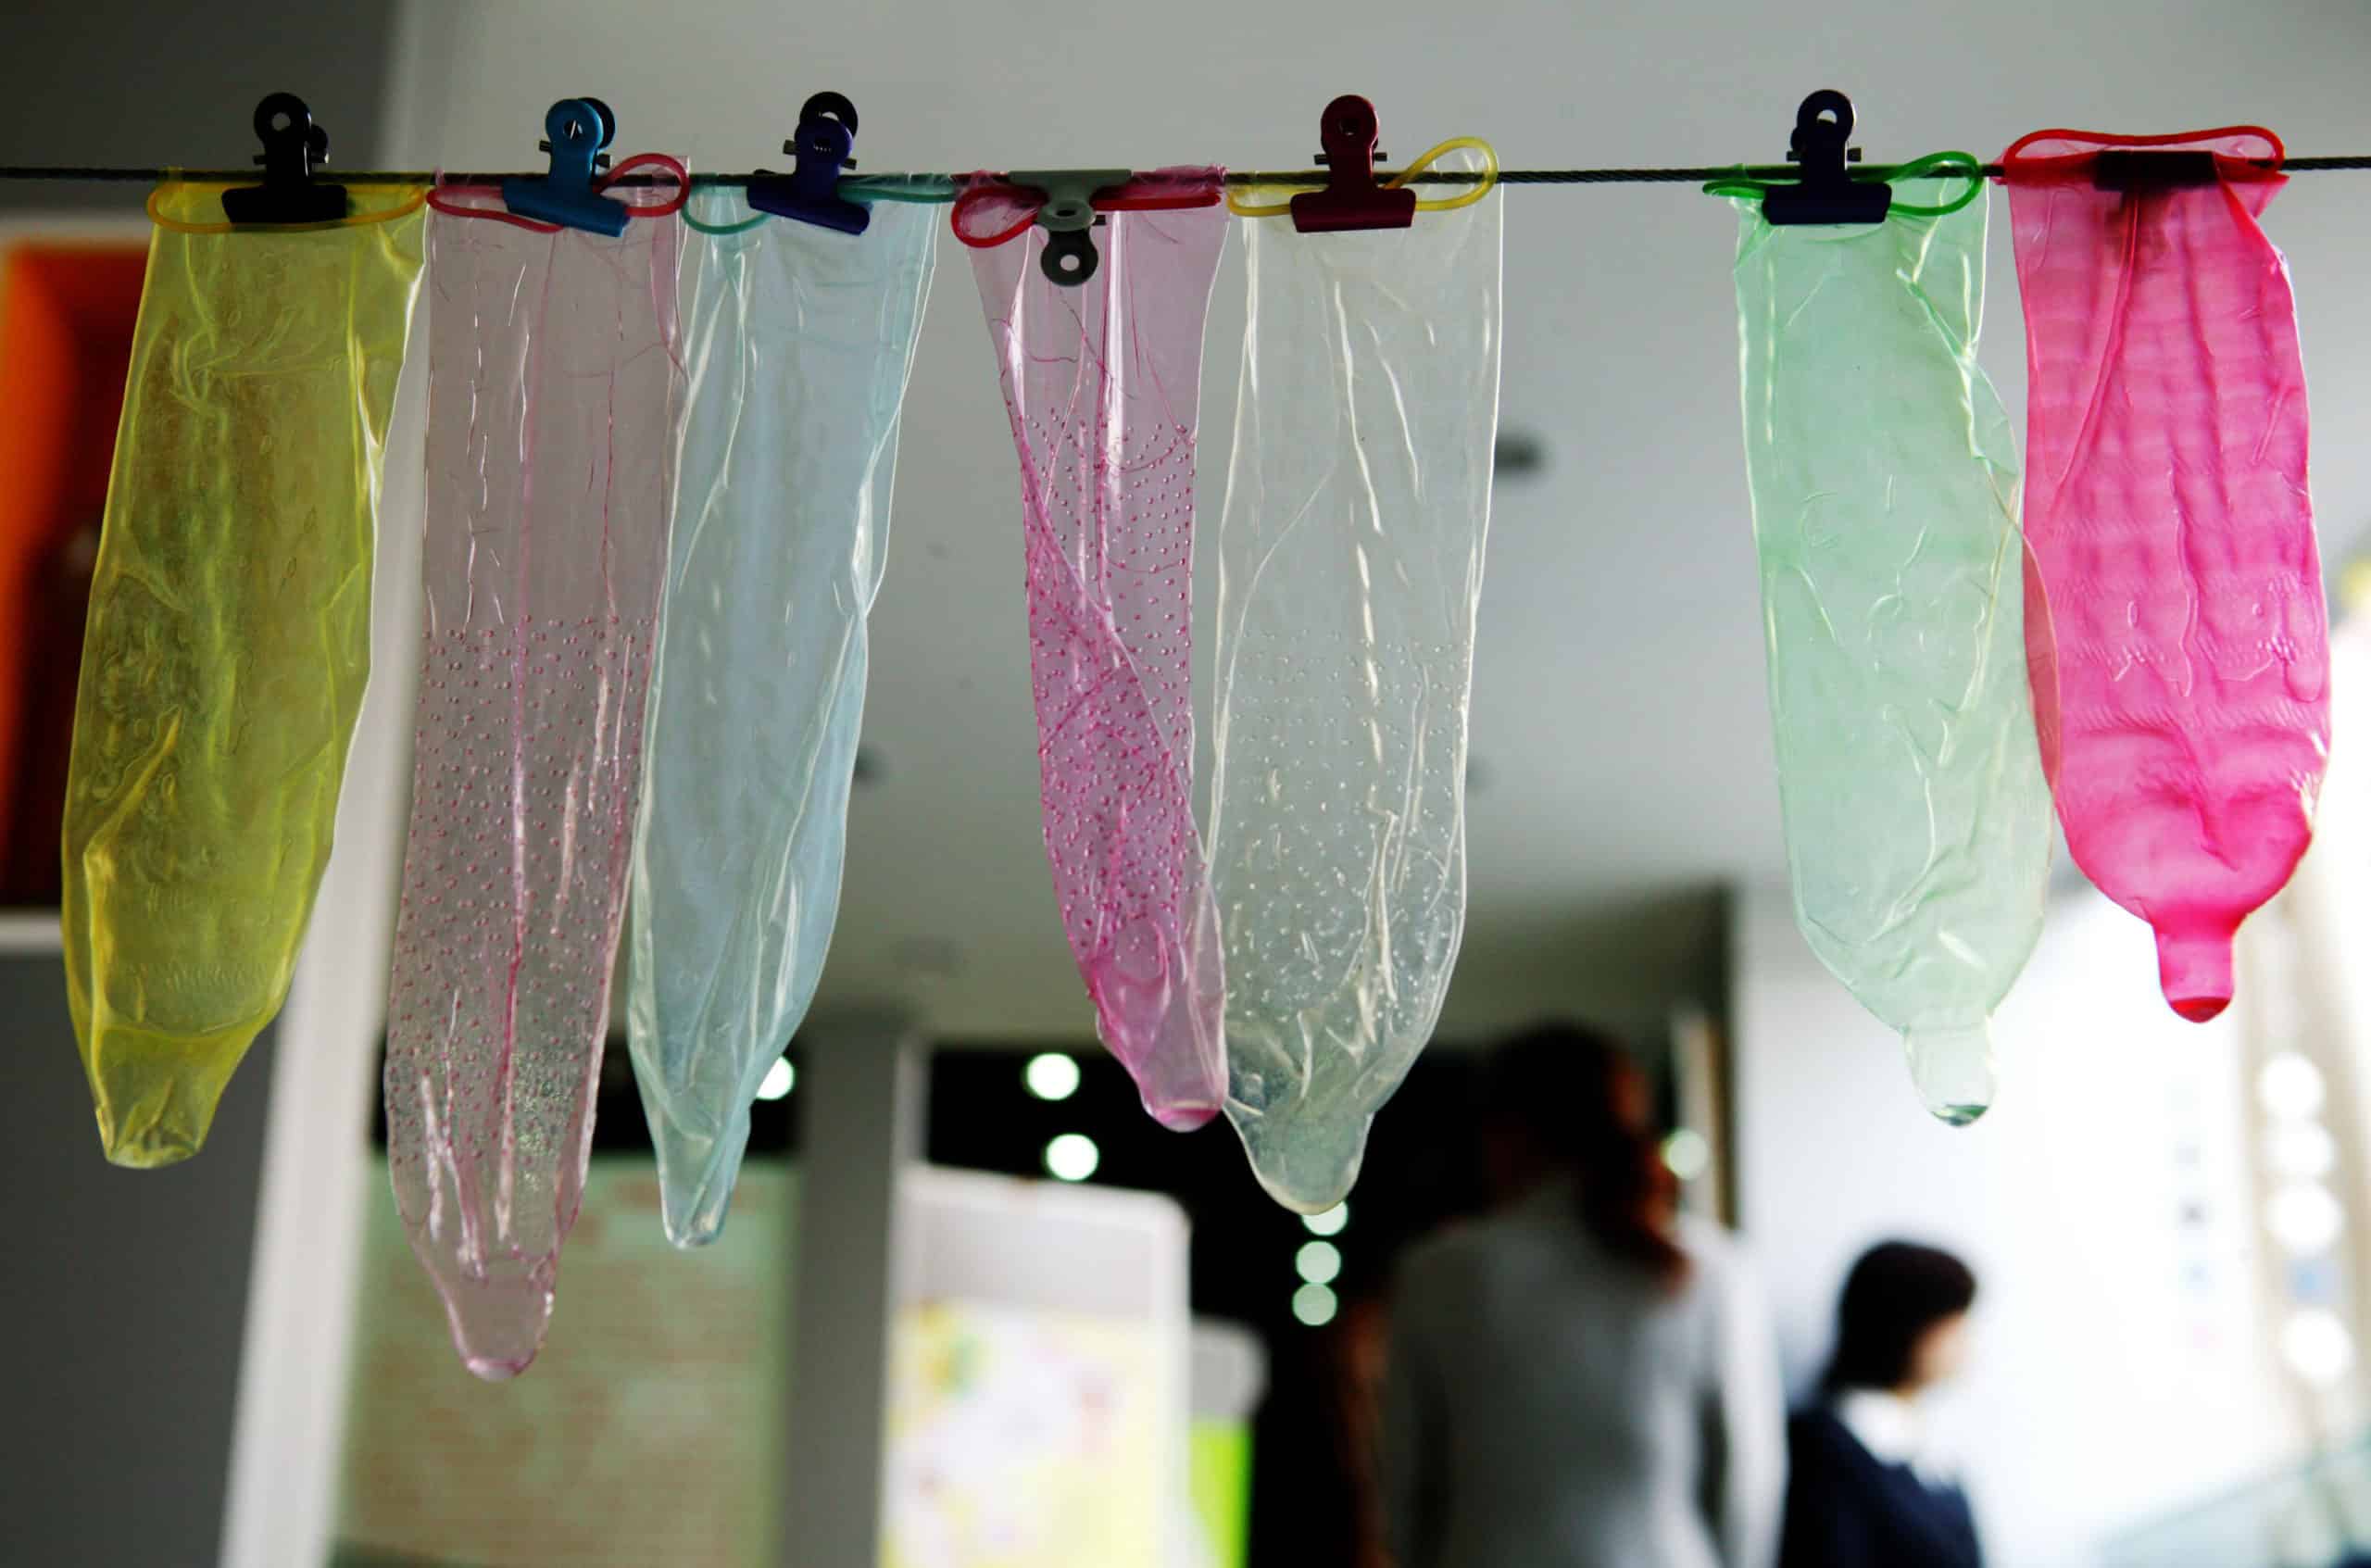 Factory In Vietnam Allegedly Caught Reselling Thousands Of Used Condoms.